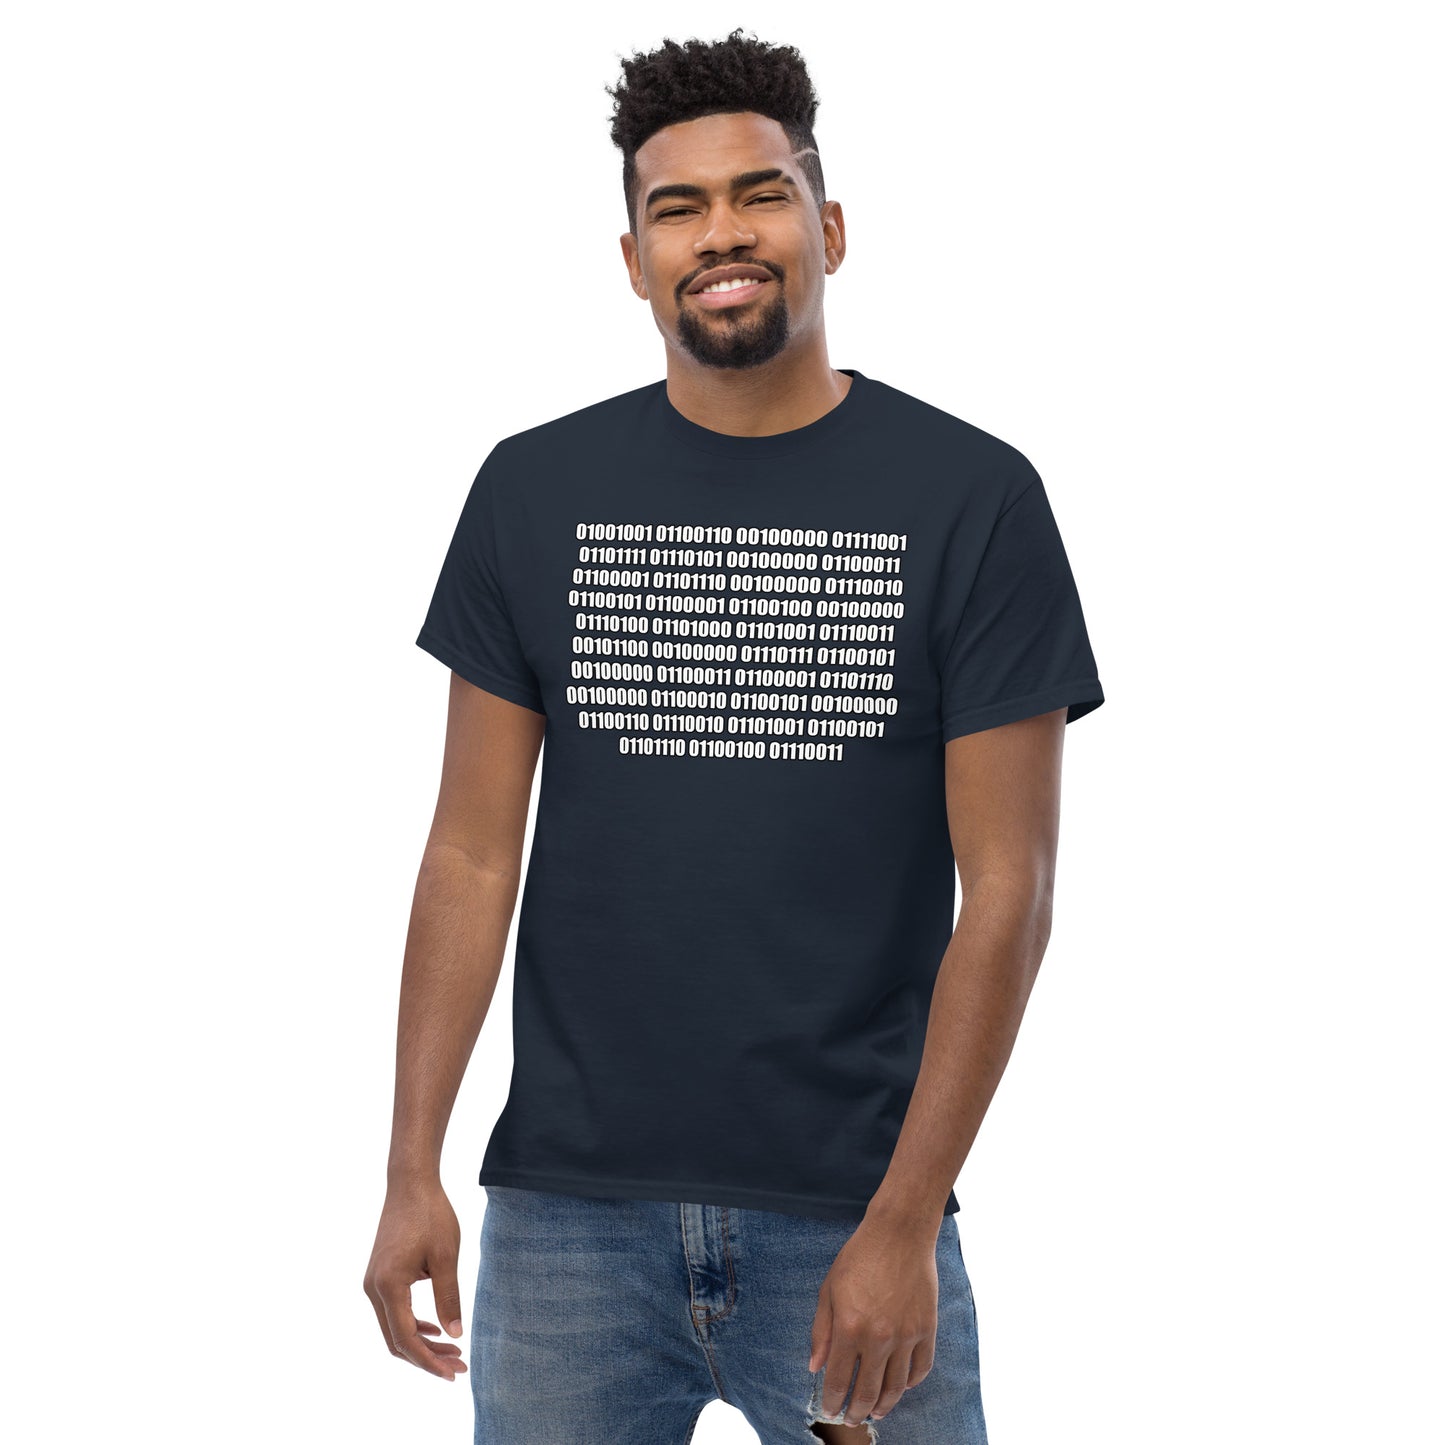 Men with navy t-shirt with binaire text "If you can read this"